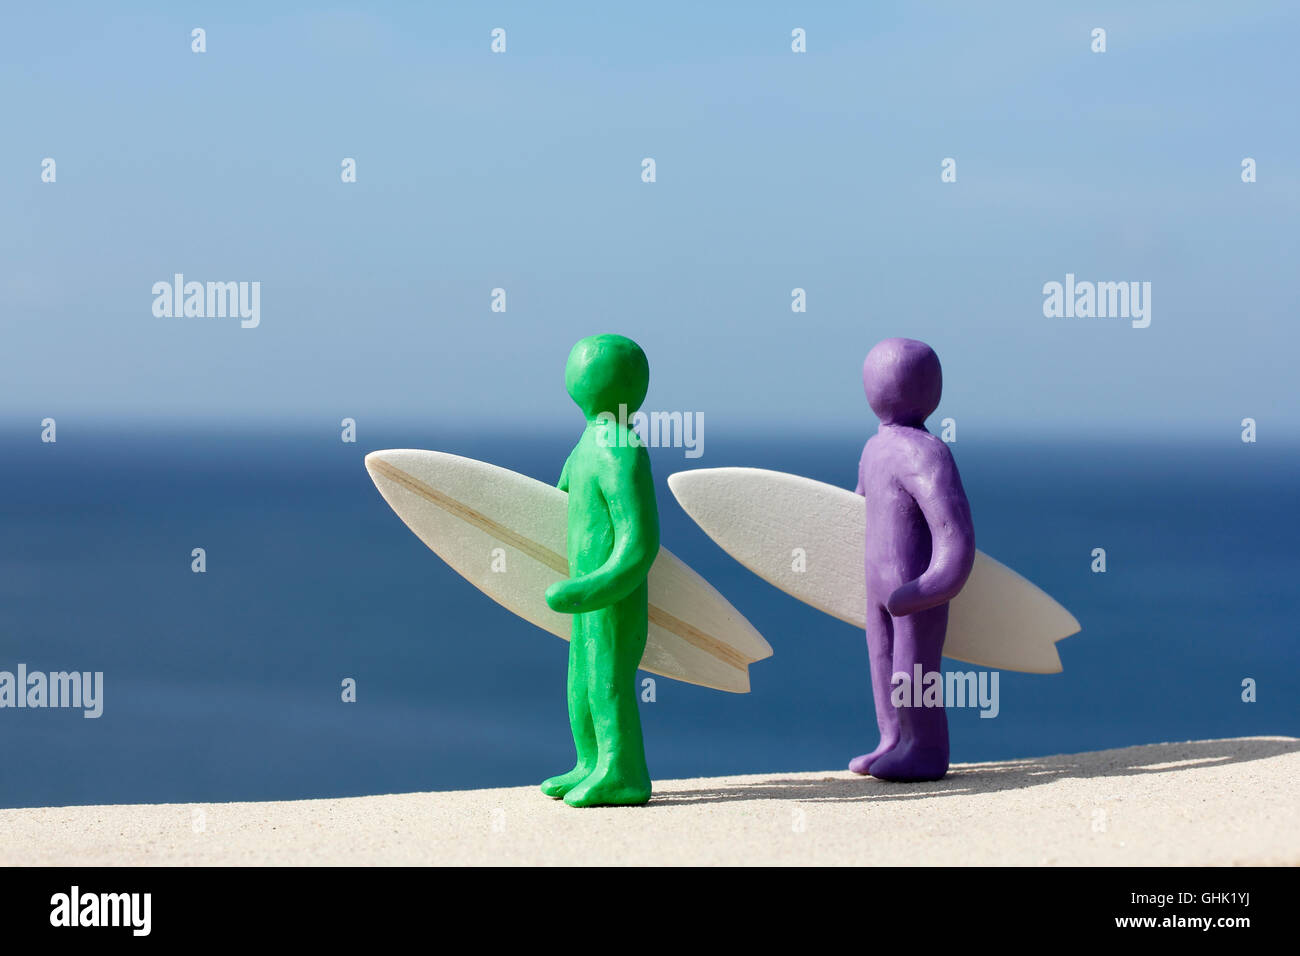 Plasticine people with balsa wood surfboards by the Ocean. Stock Photo